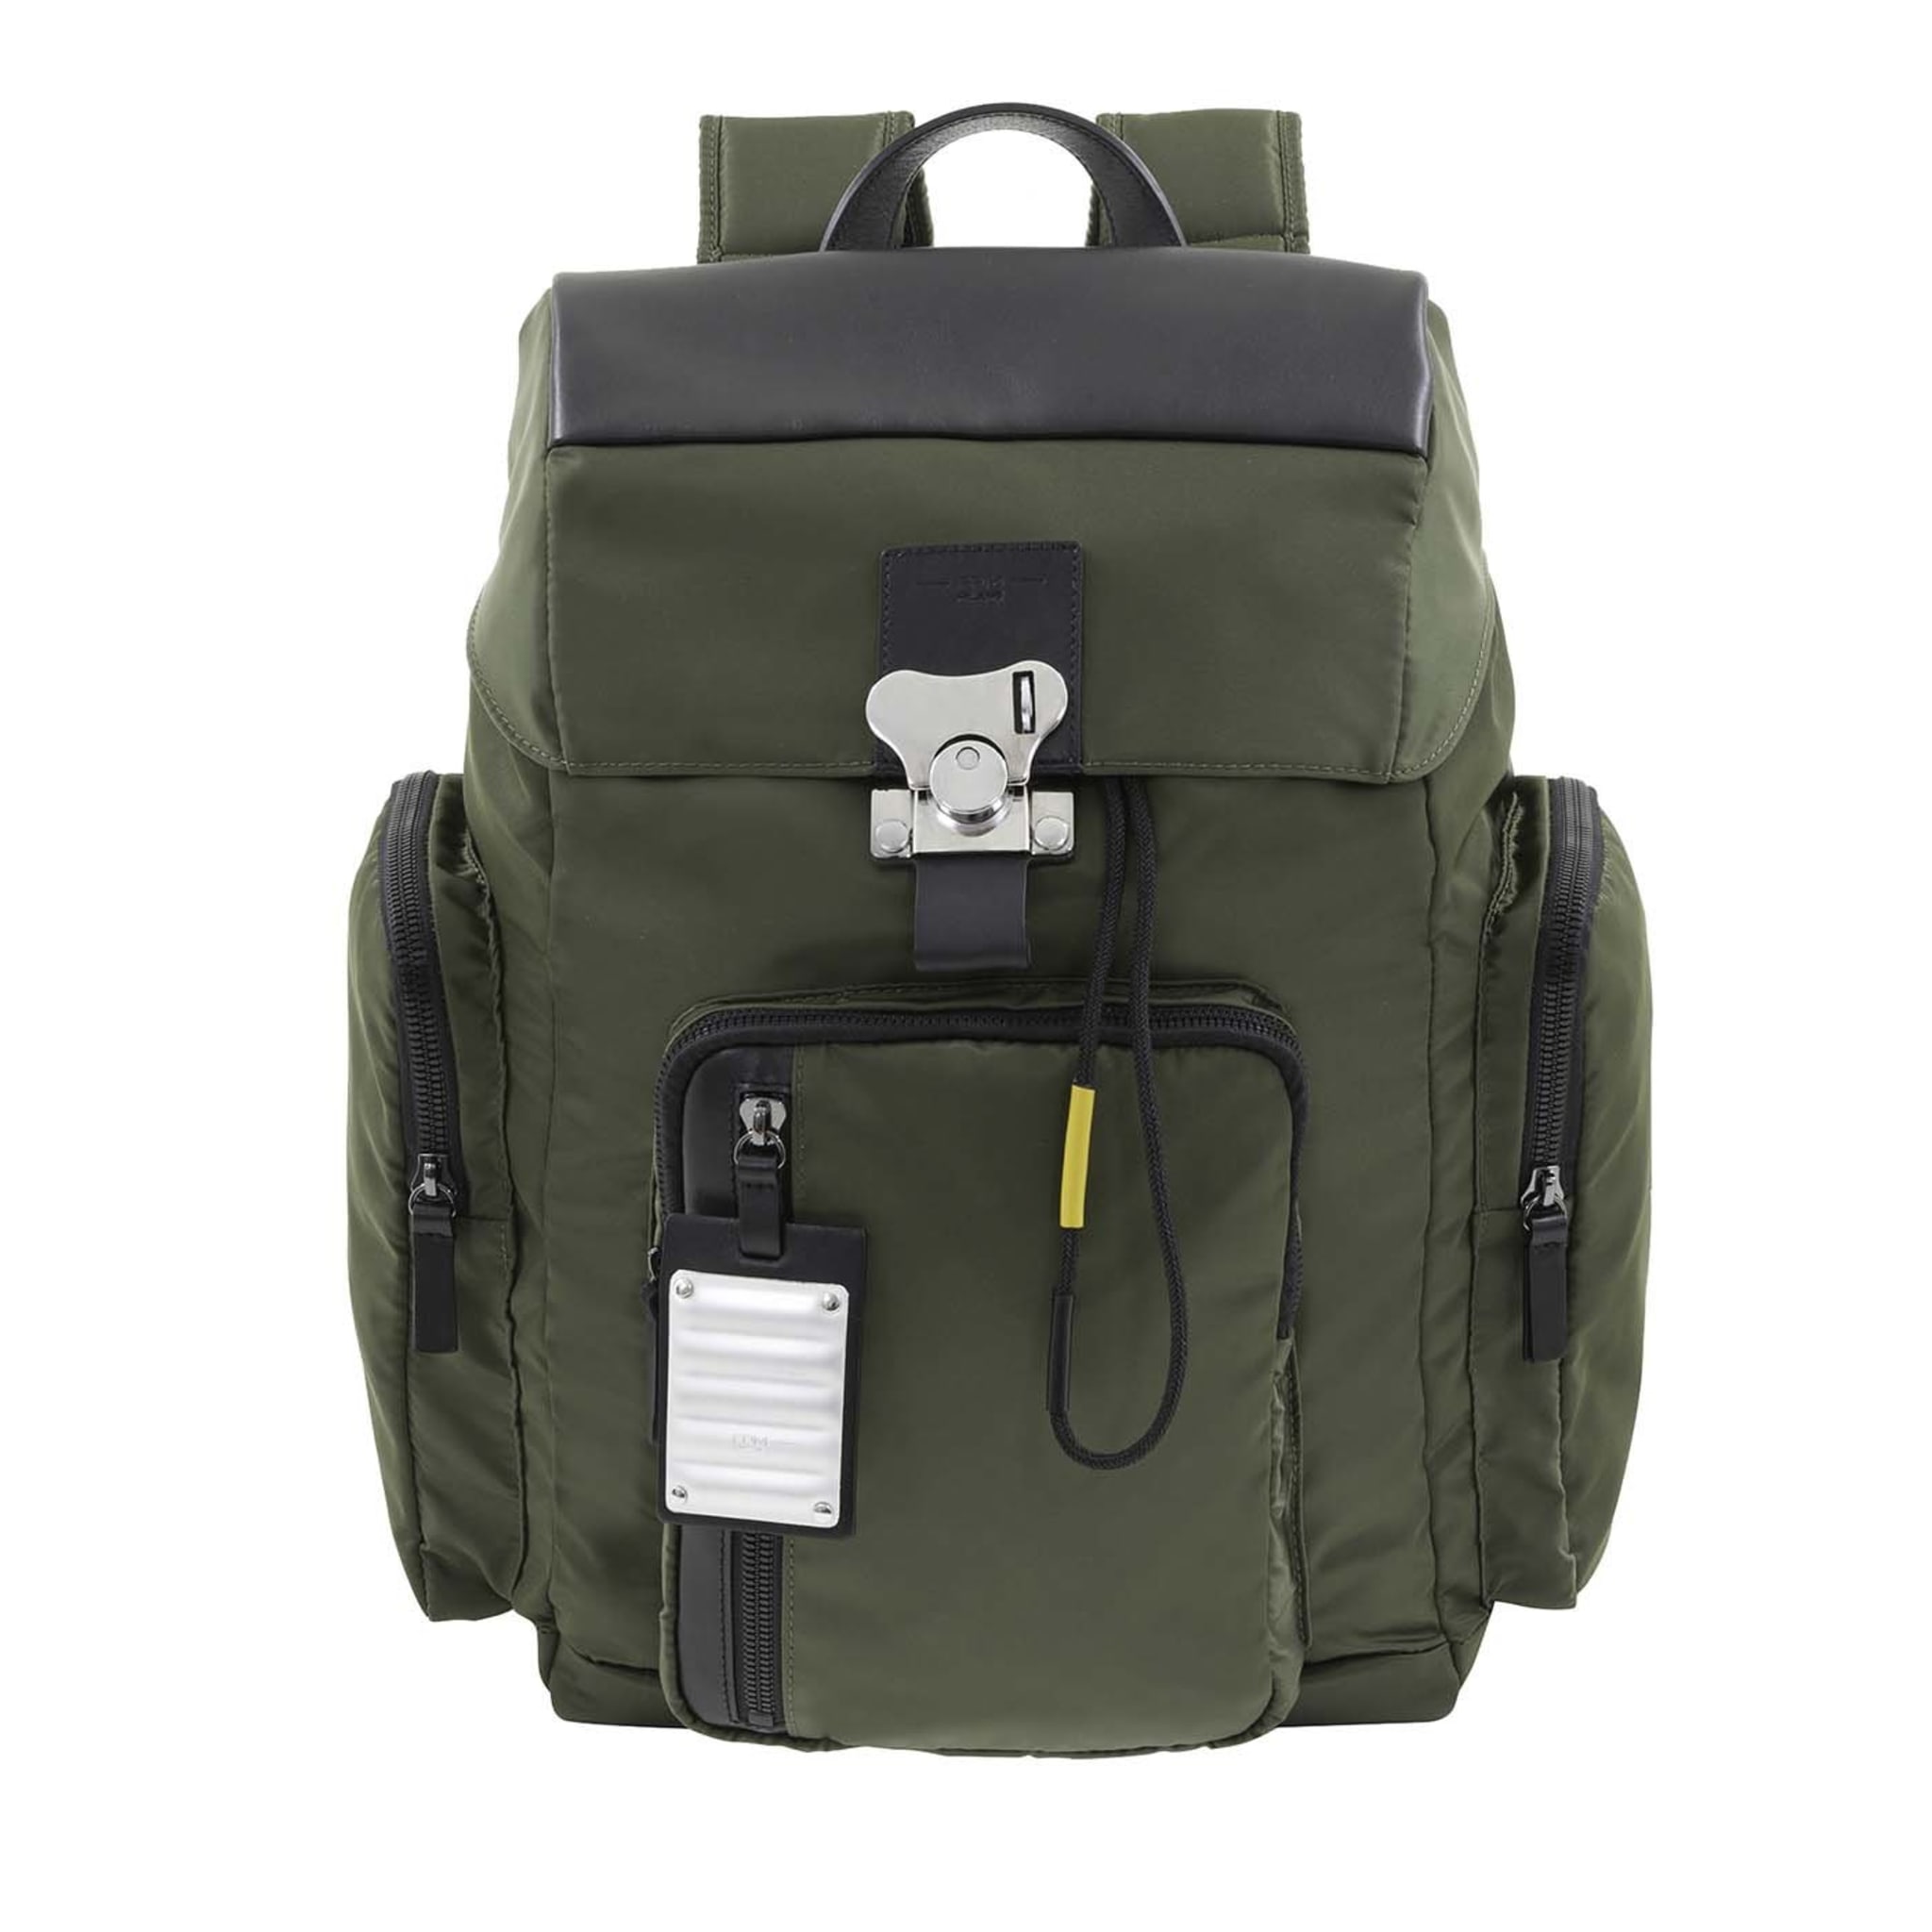 Medium Bank on the Road Butterfly Backpack Green - Main view